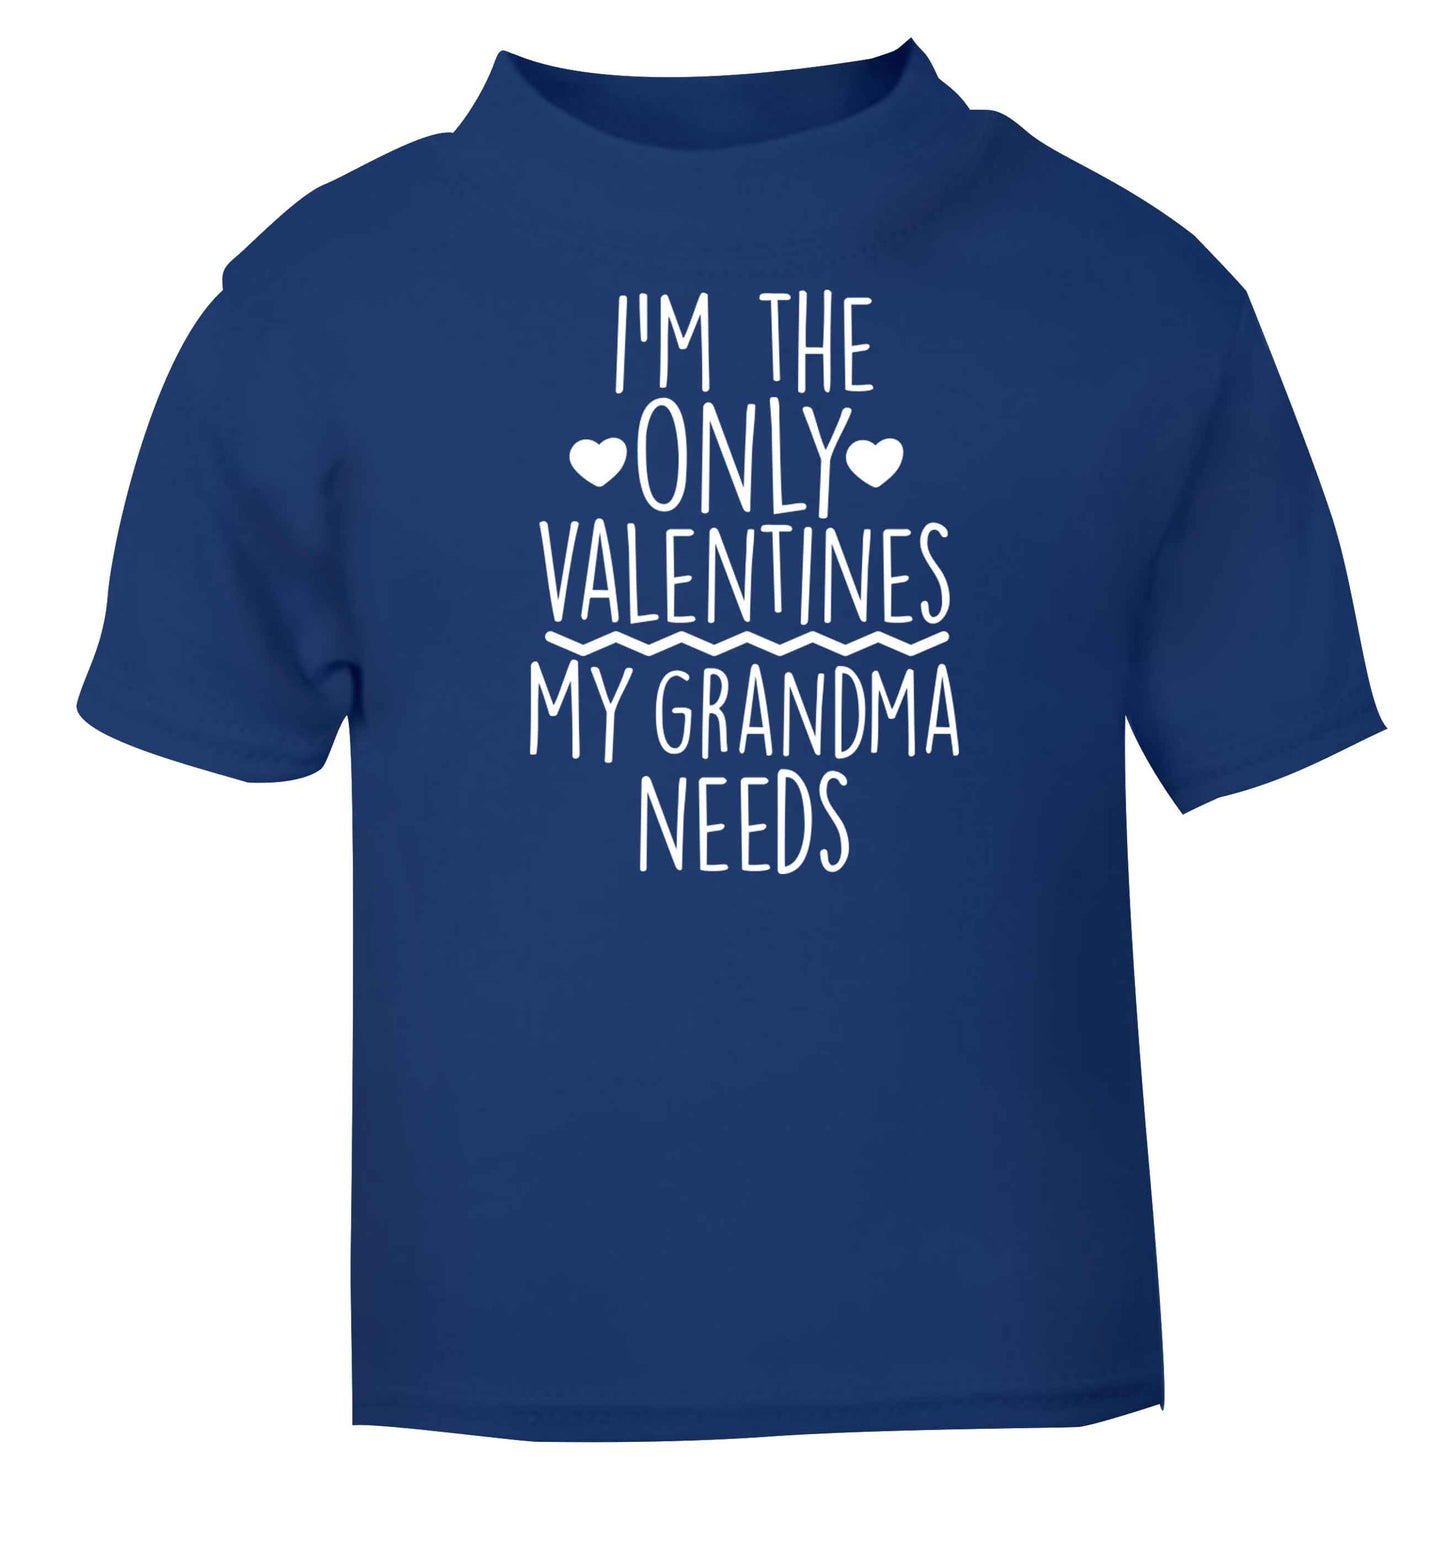 I'm the only valentines my grandma needs blue baby toddler Tshirt 2 Years